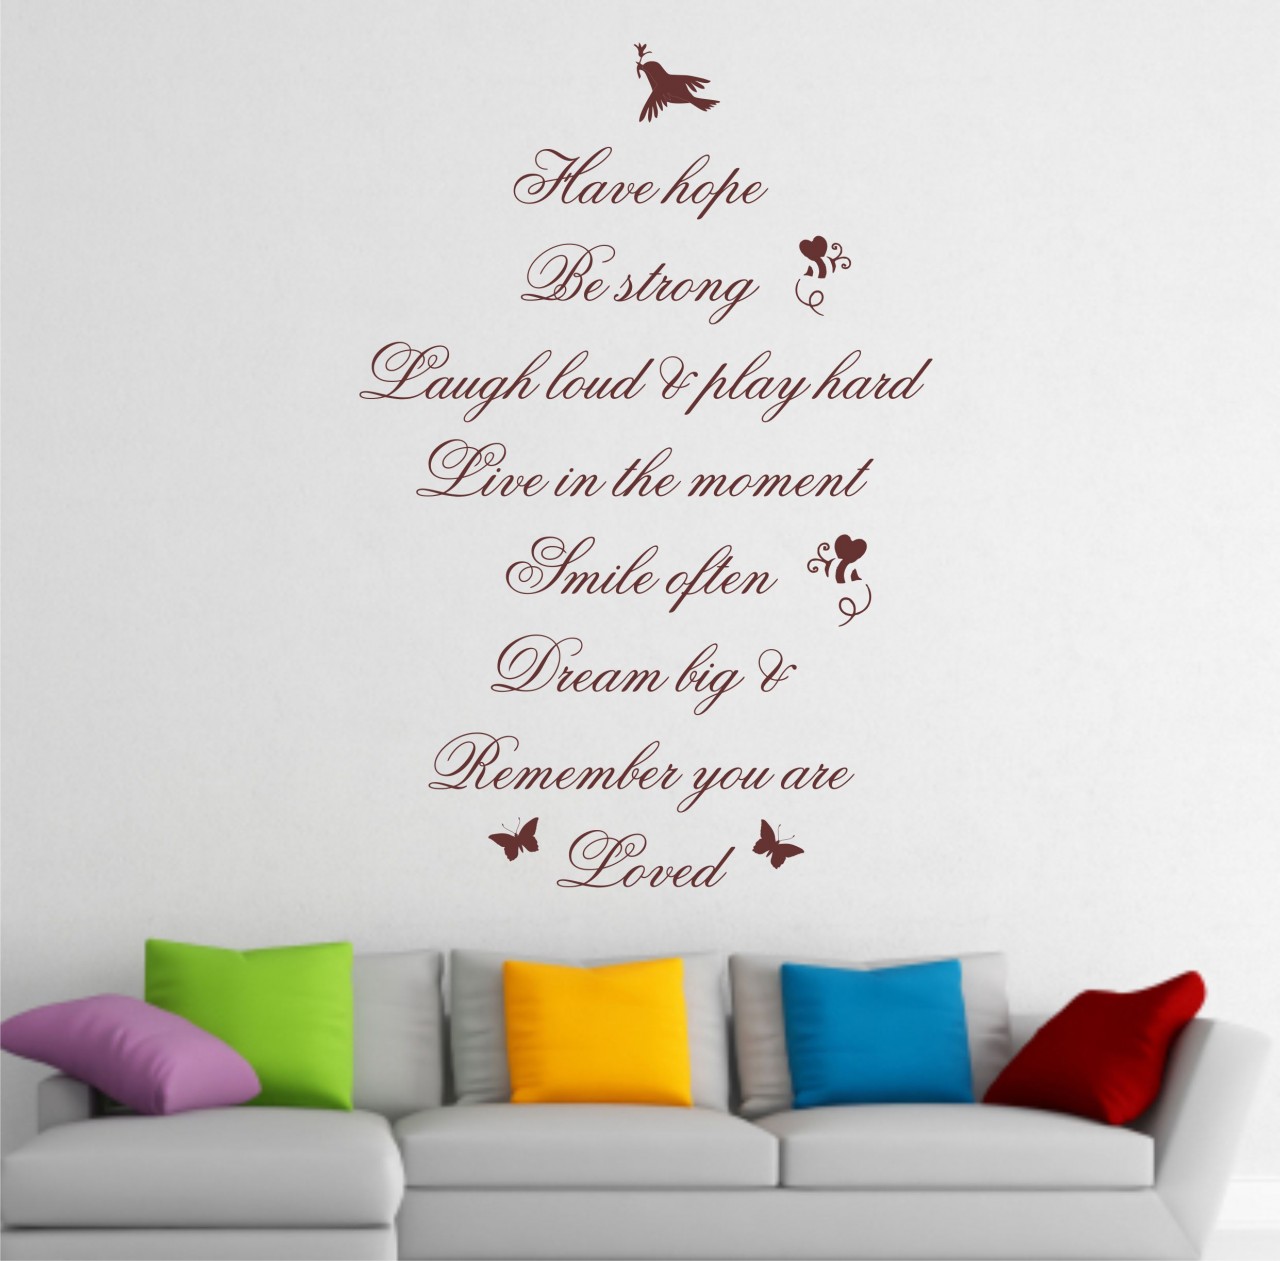 wall art quotes 48 wall art sayings, art canvas, bus scrolls, text quotes, quotes cities, AOWNNVK